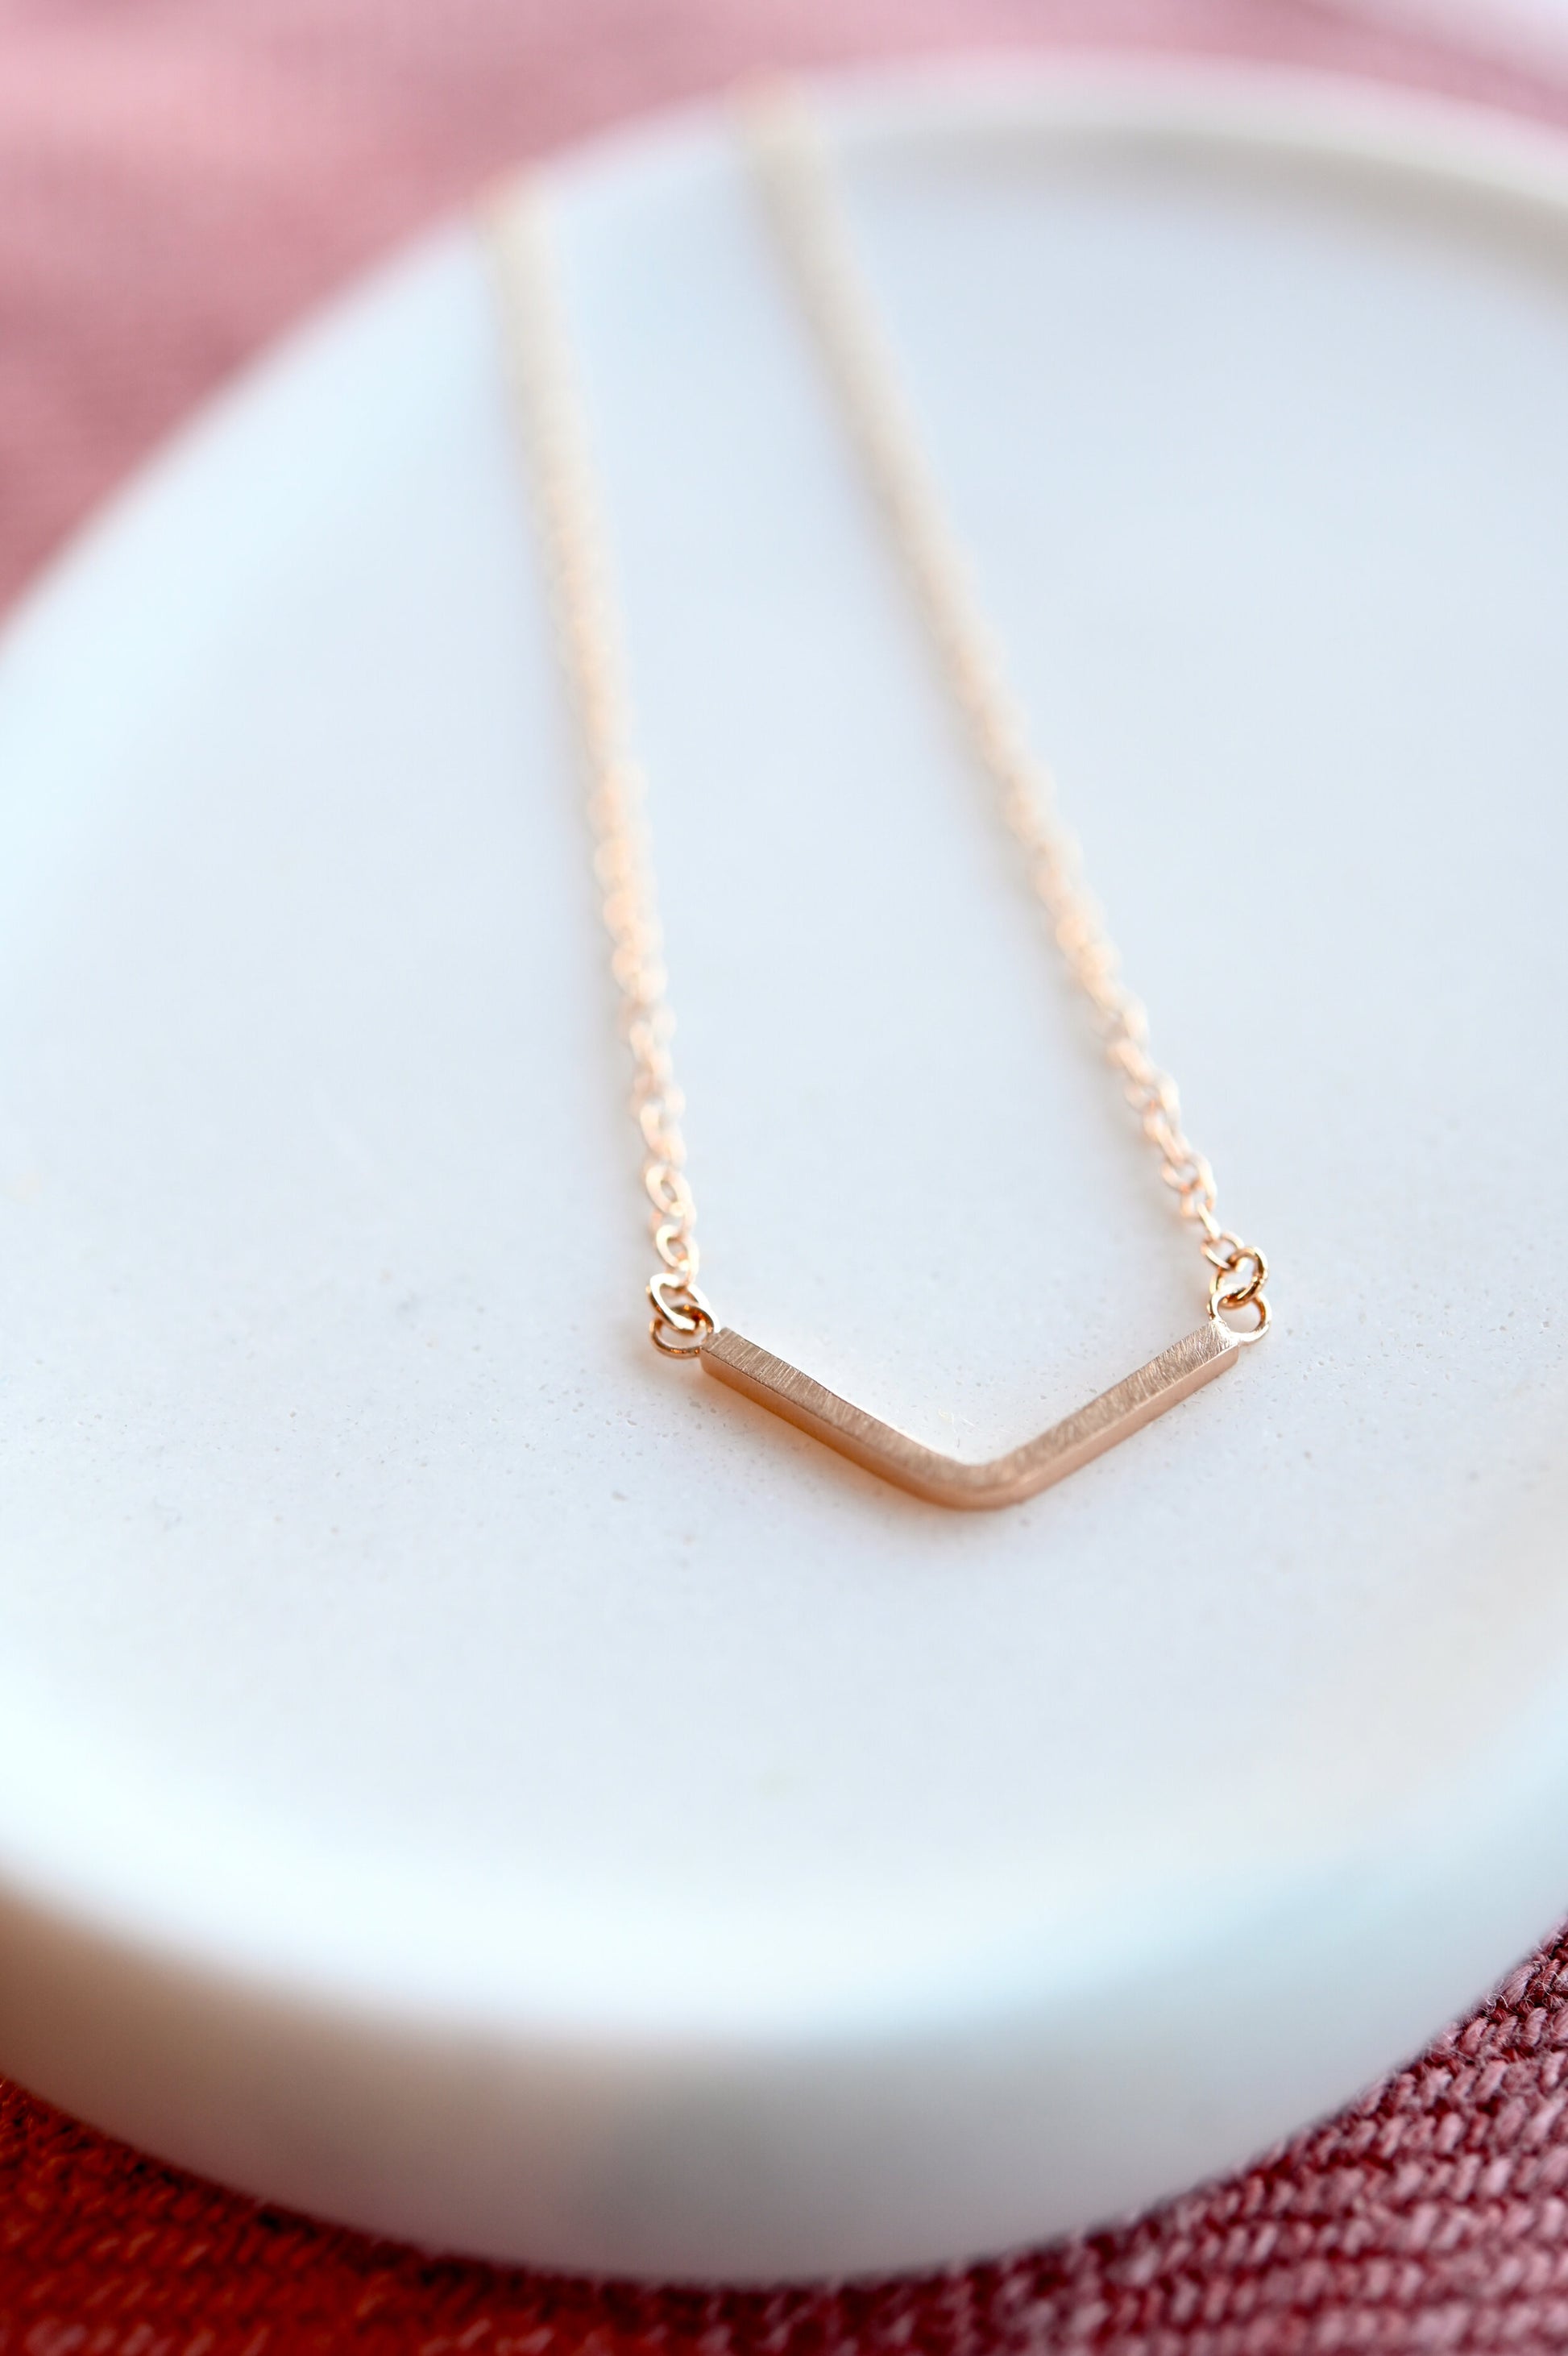 Chevron Necklace,sterling silver, gold, rose gold, rose gold plated, gold plated, bracelet, handmade, handmade jewellery, necklace, chevron